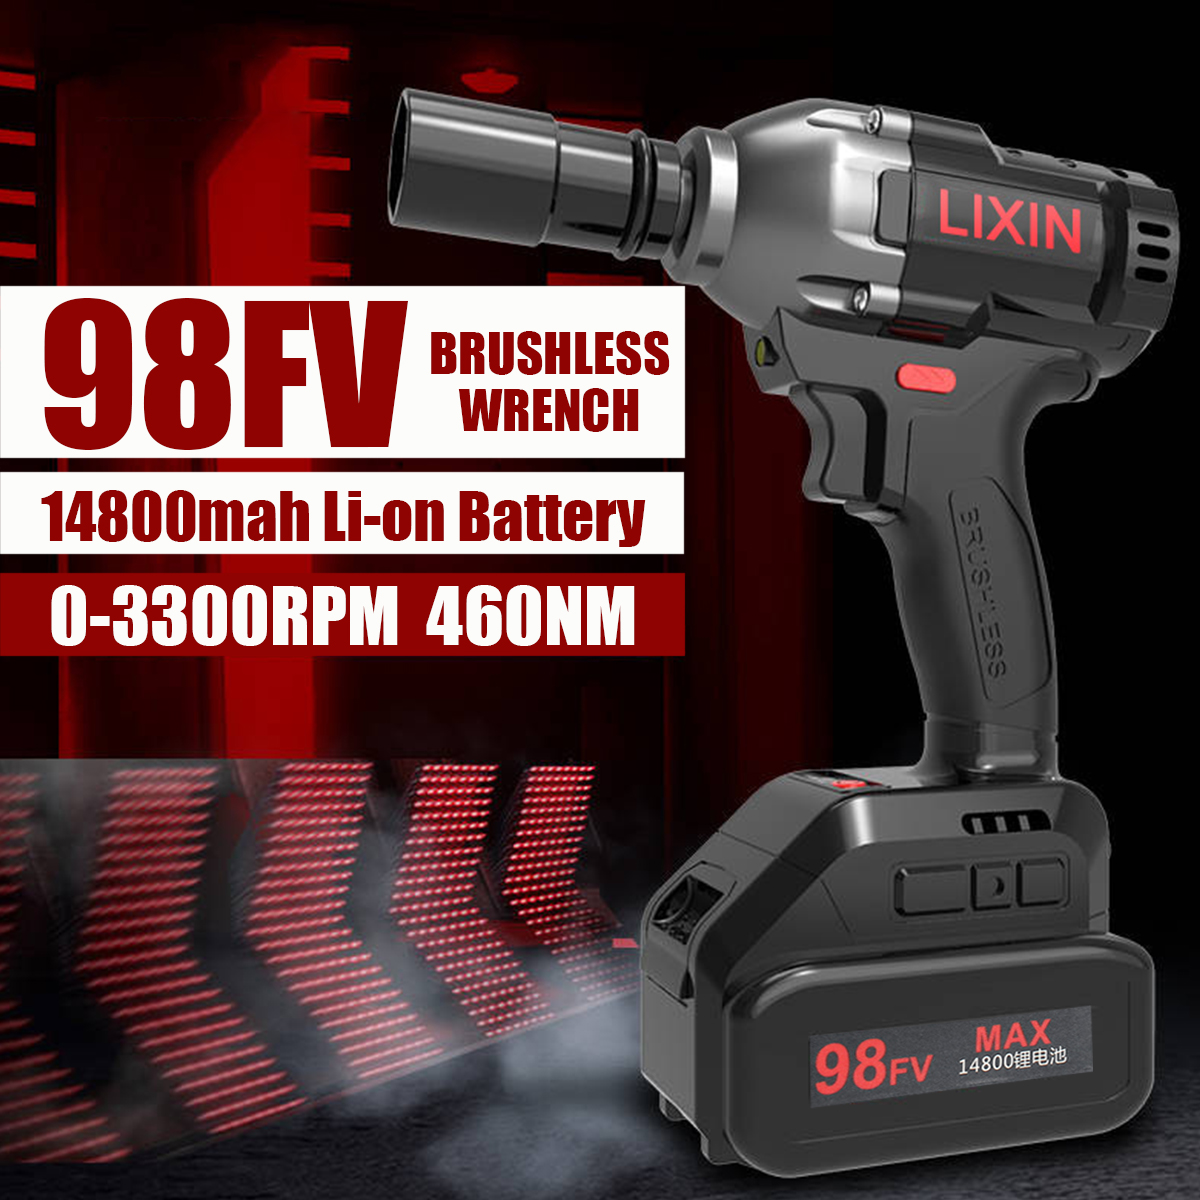 98FV 14800mAh Cordless Brushless Electric Wrench Drill LED Light W/ 1 or 2 Li-on Battery 16